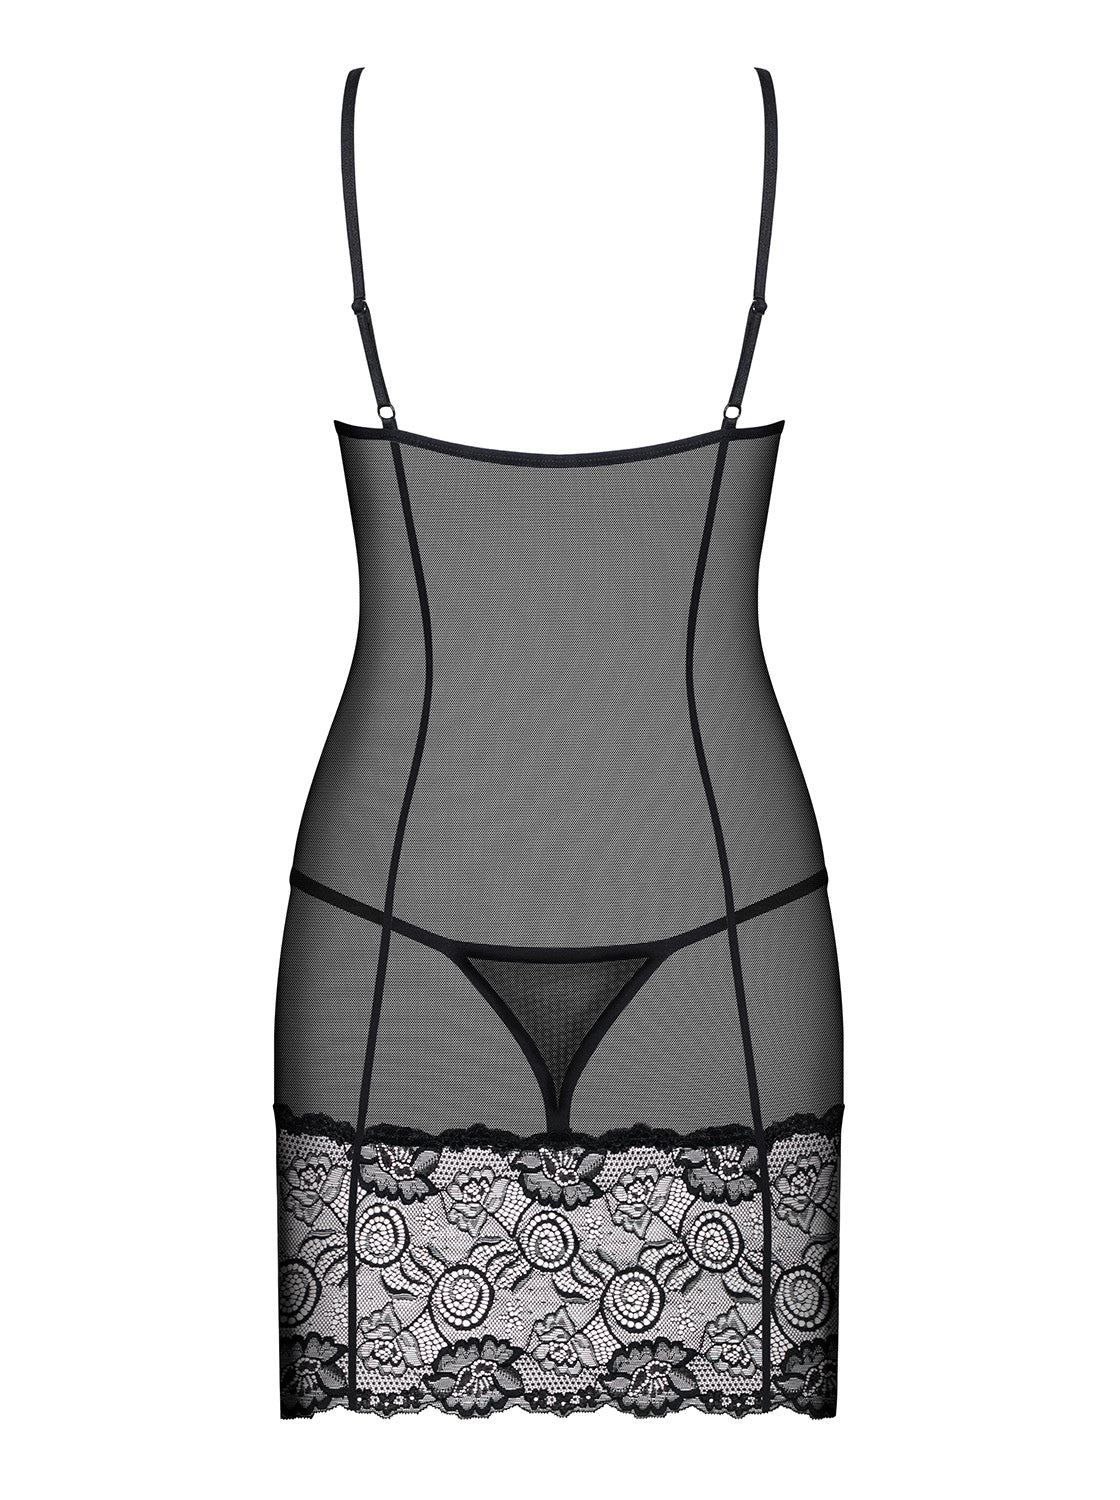 Alluria Enchanting Lace Chemise and Thong Set Black